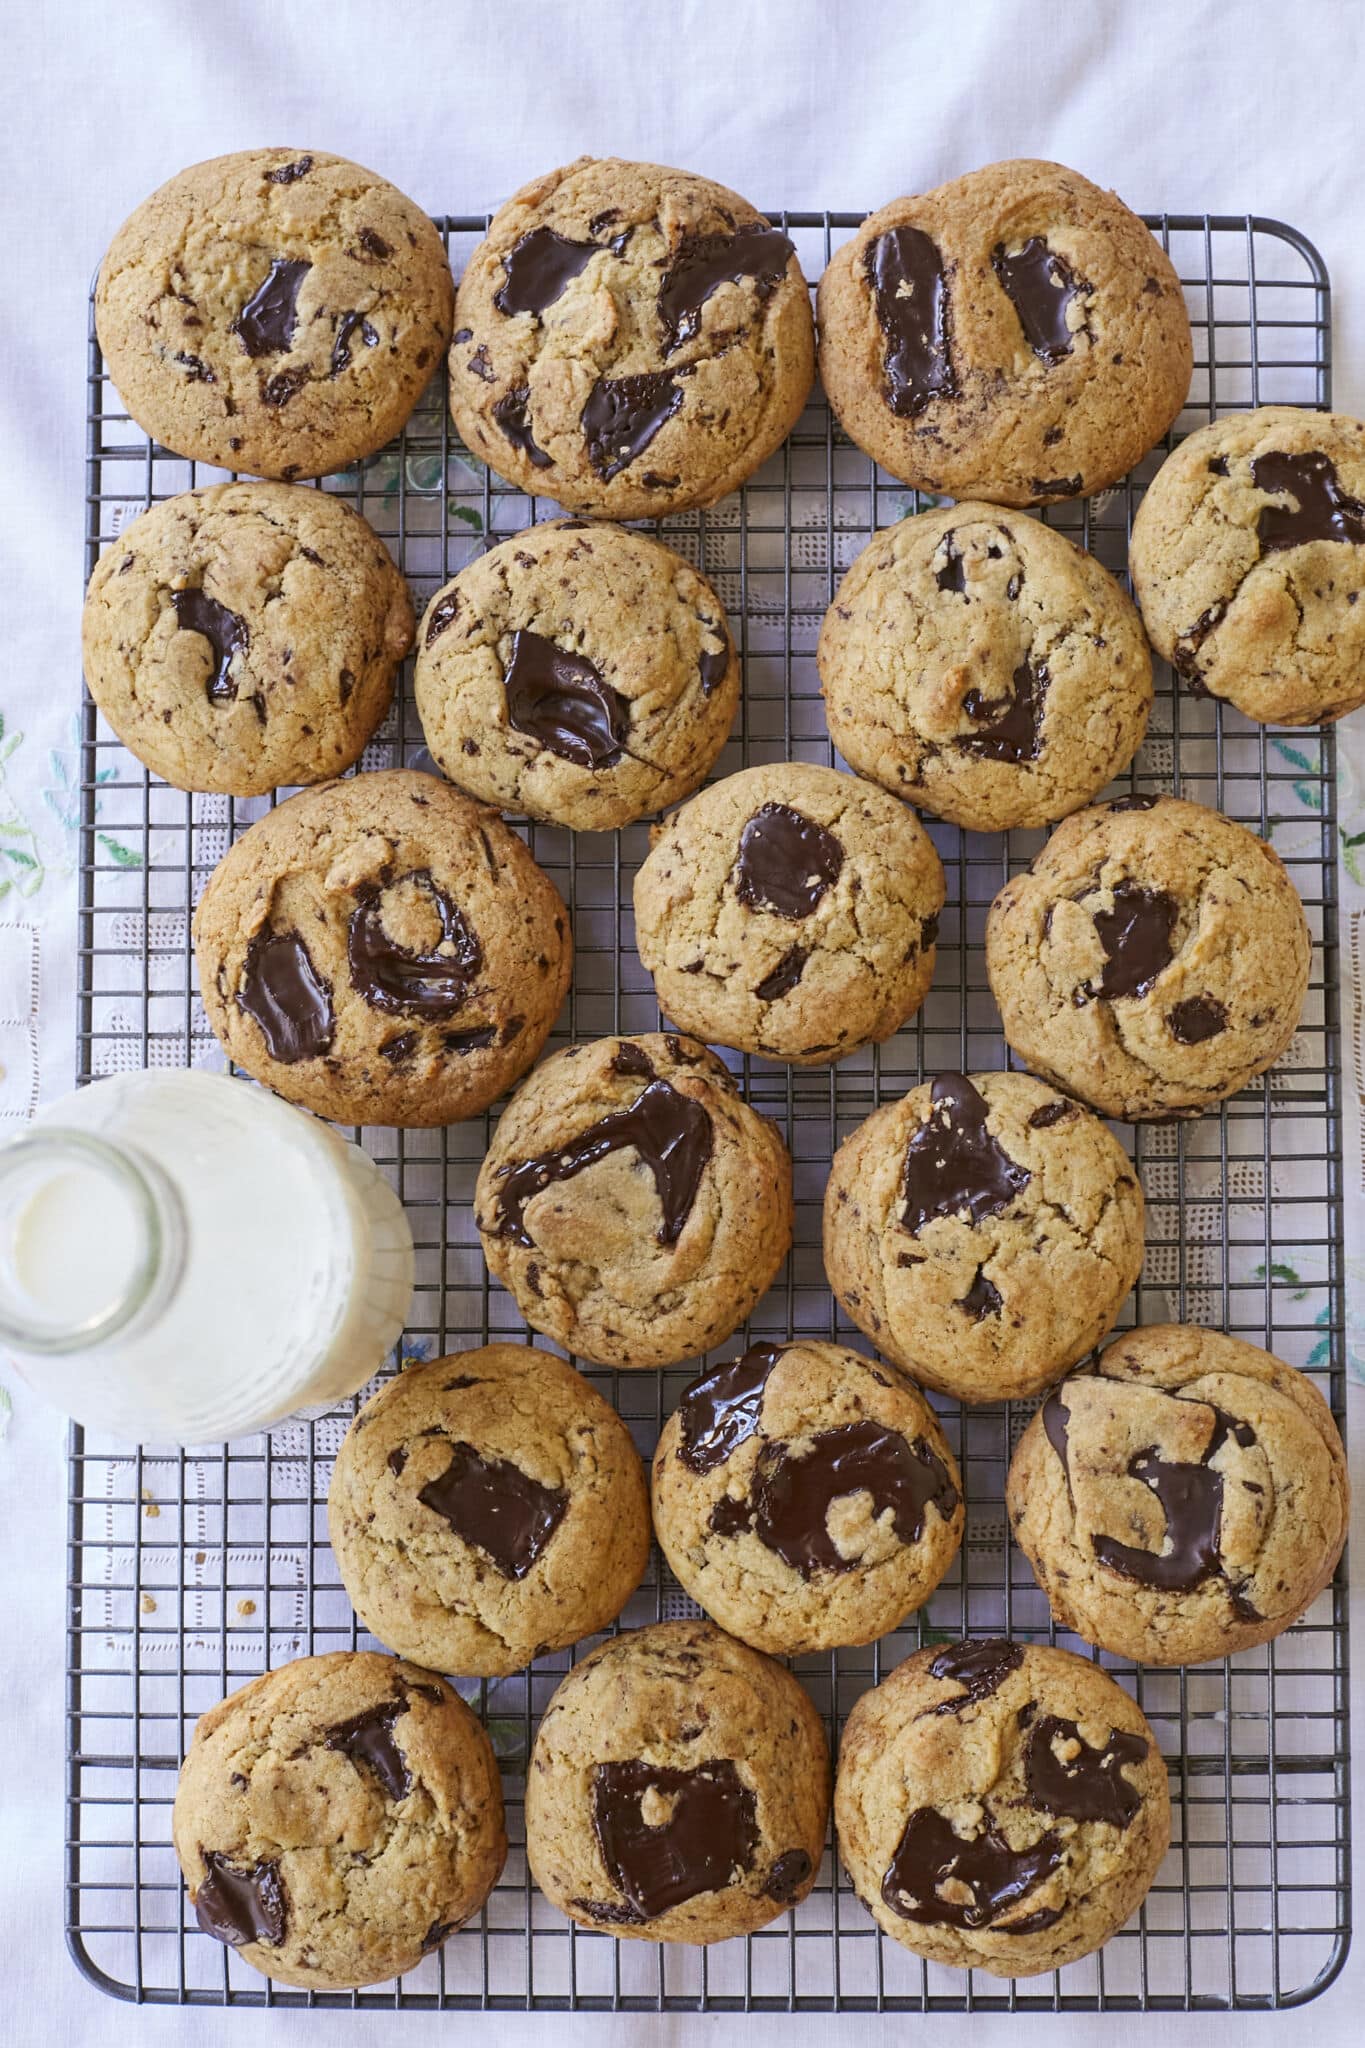 Sourdough Chocolate Chip cookies are baked golden brown with pools of chocolate throughout are cooling on a wire rack. They're paired with milk.